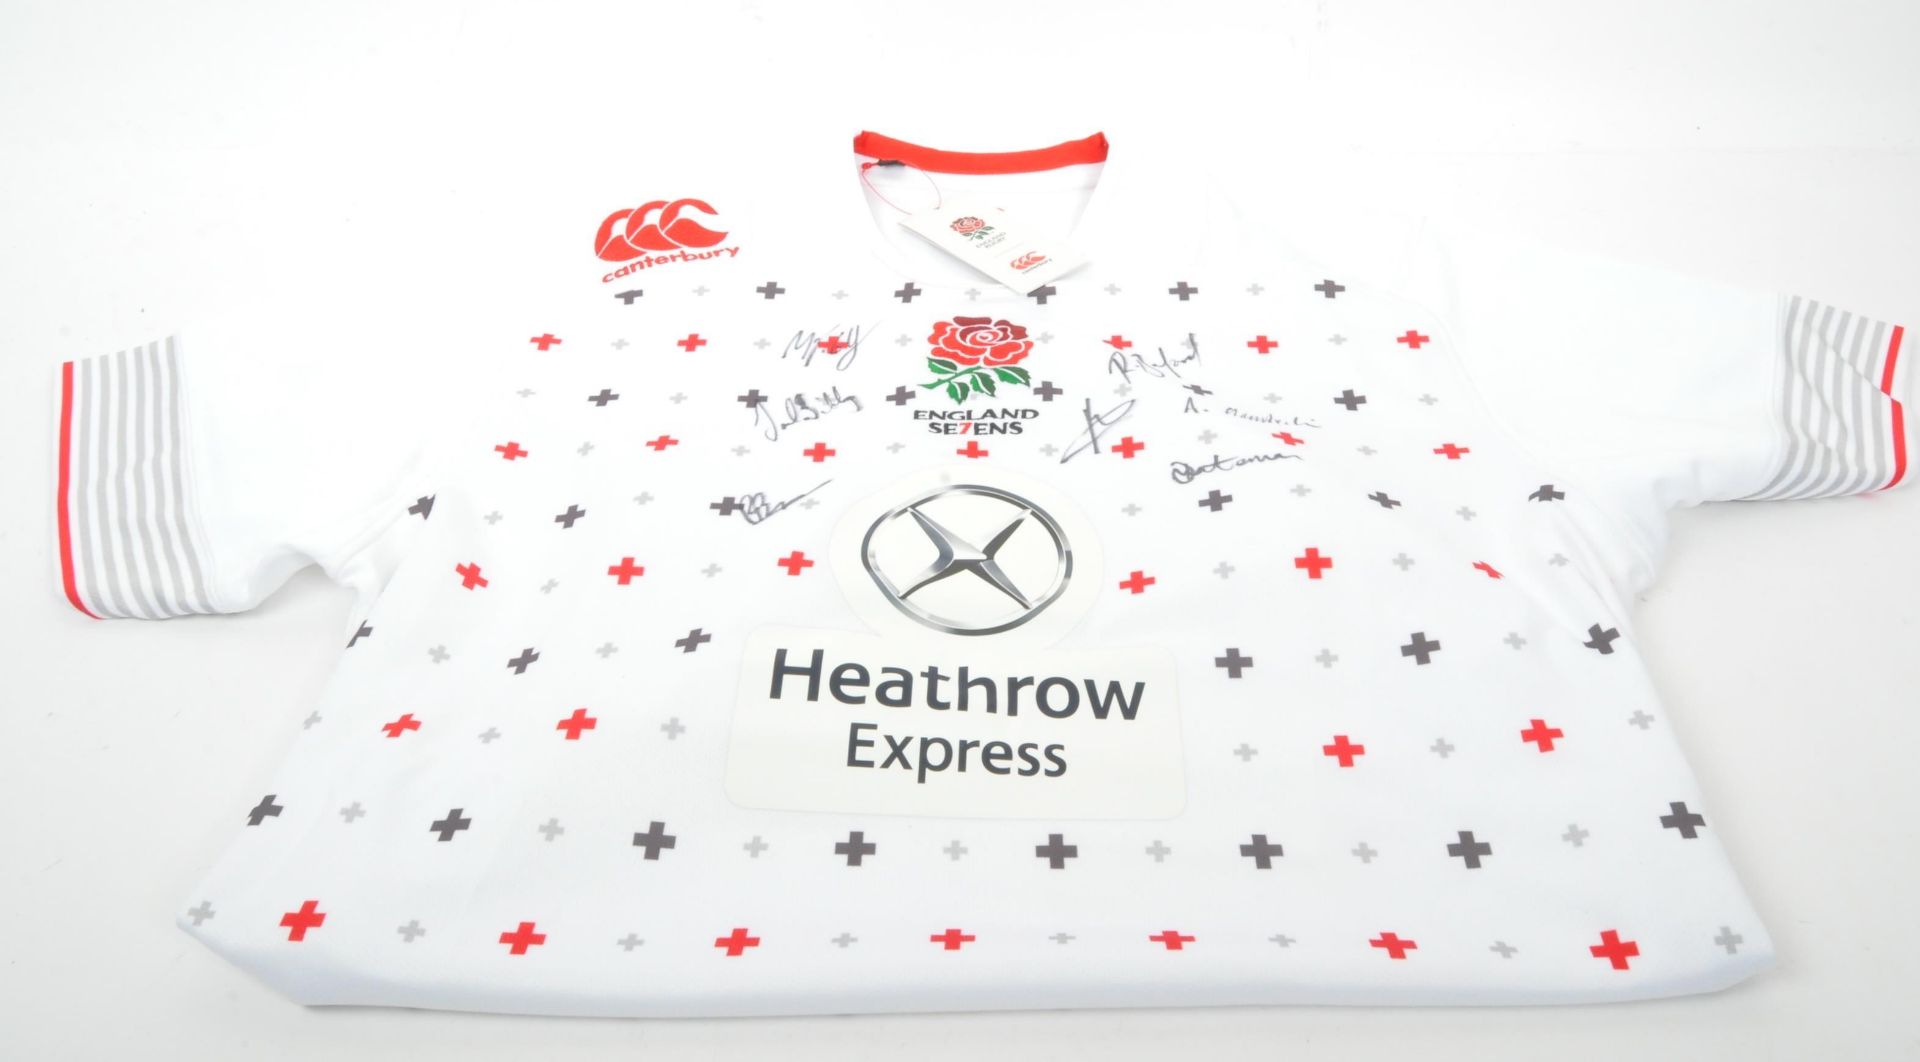 SIGNED 2016 OLYMPIC TEAM - 2013 ENGLAND RUGBY SEVENS SHIRT - Image 2 of 5